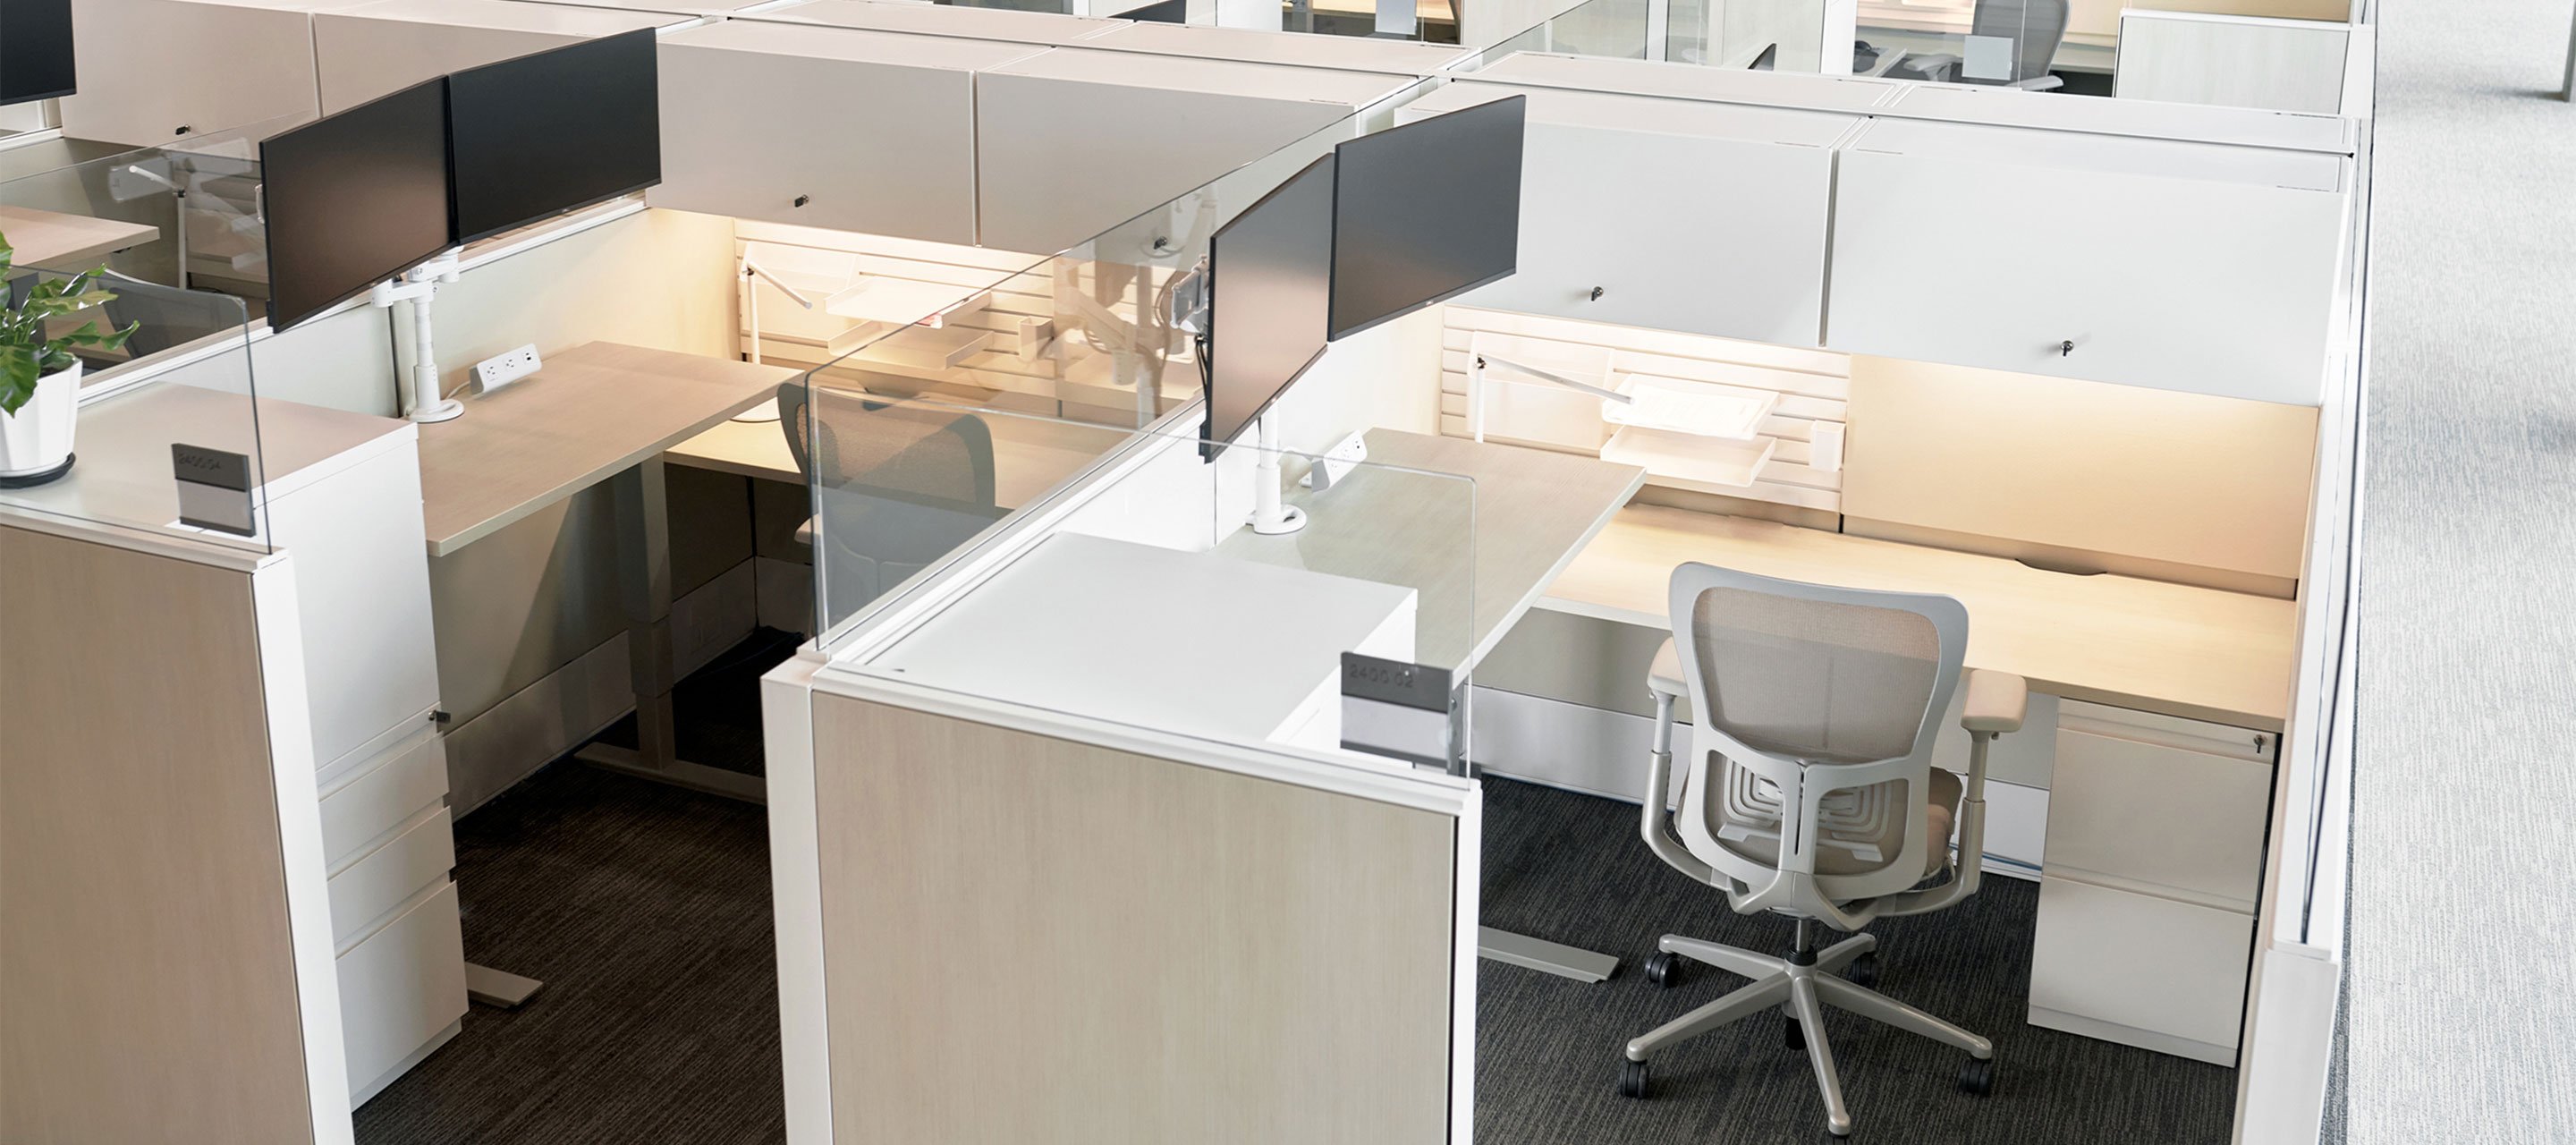 Haworth Zody chair and workstations being used in Dolese workspace